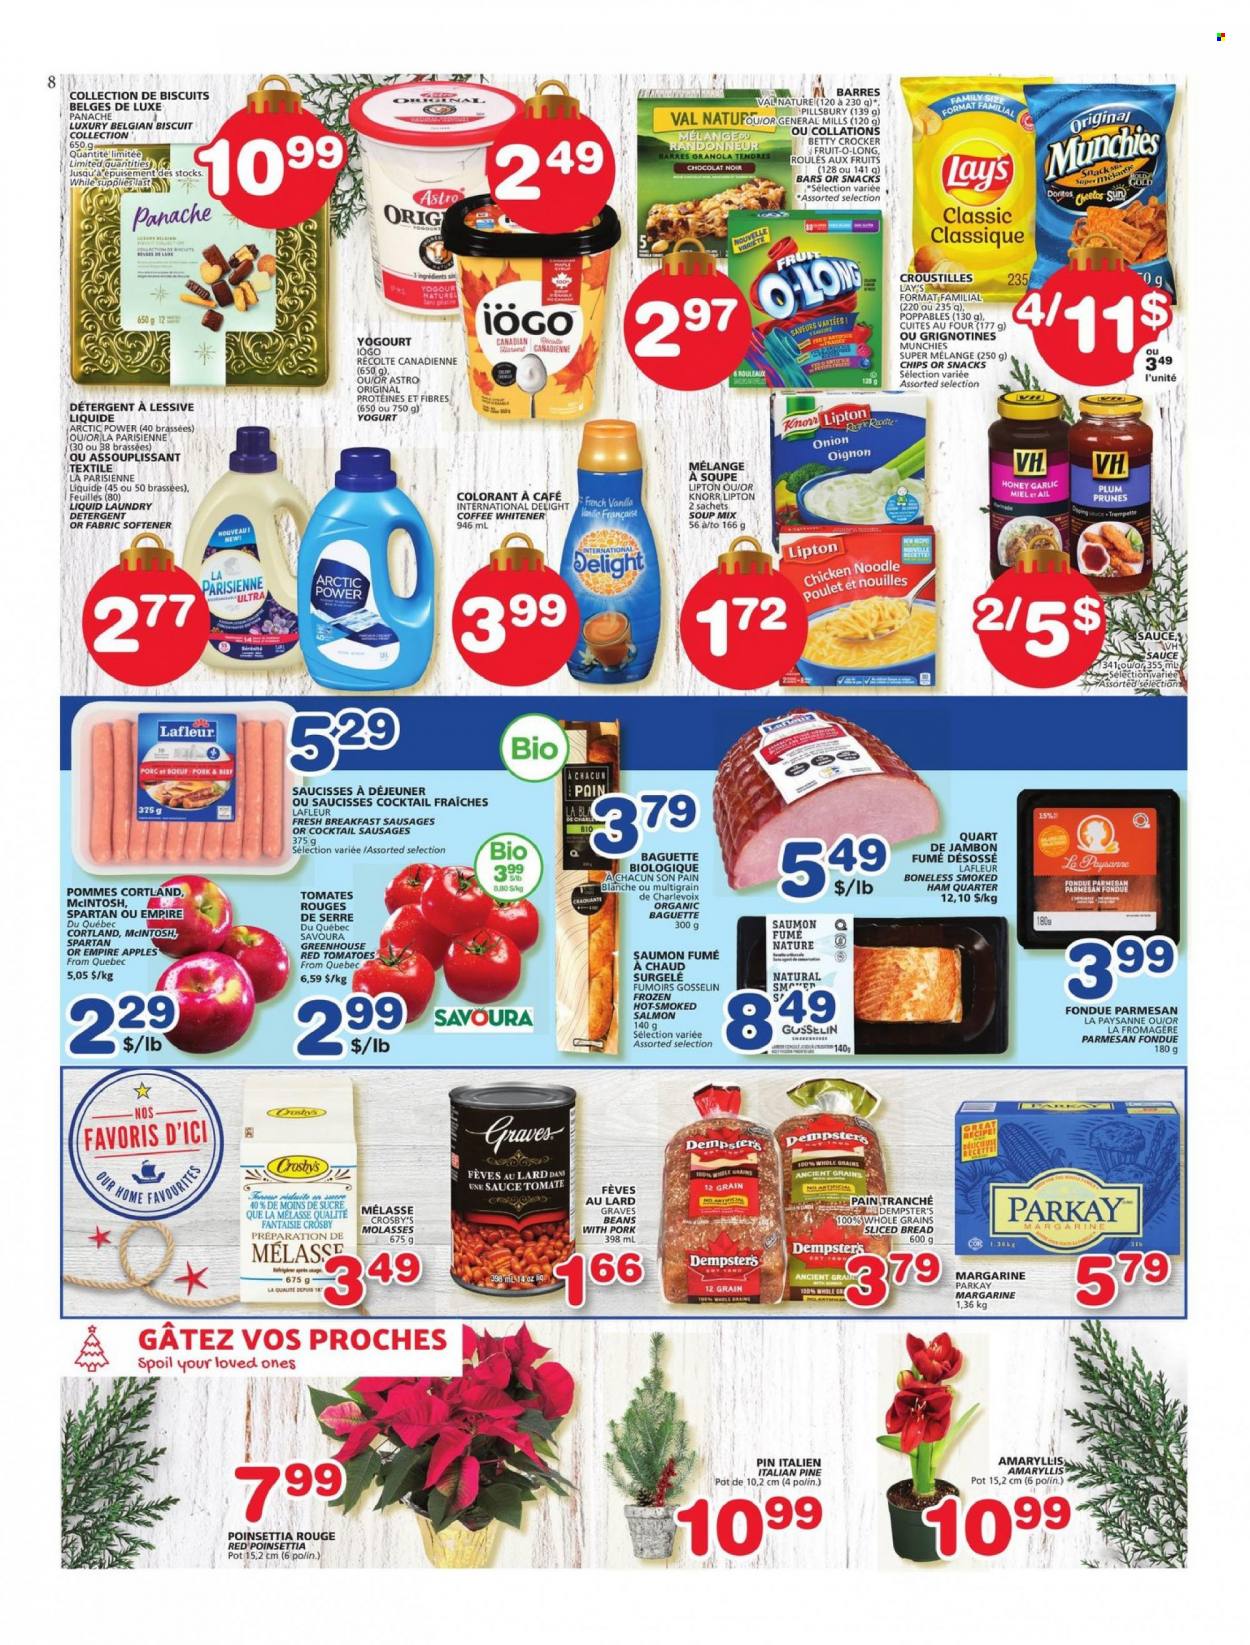 Les Marchés Tradition Flyer - November 24, 2022 - November 30, 2022 - Sales products - bread, garlic, tomatoes, apples, salmon, smoked salmon, soup mix, soup, sauce, Pillsbury, noodles, ham, smoked ham, sausage, parmesan, yoghurt, margarine, biscuit, Doritos, Cheetos, Lay's, molasses, honey, prunes, dried fruit, fabric softener, toner, baguette, detergent, lard, Lipton, Knorr. Page 7.